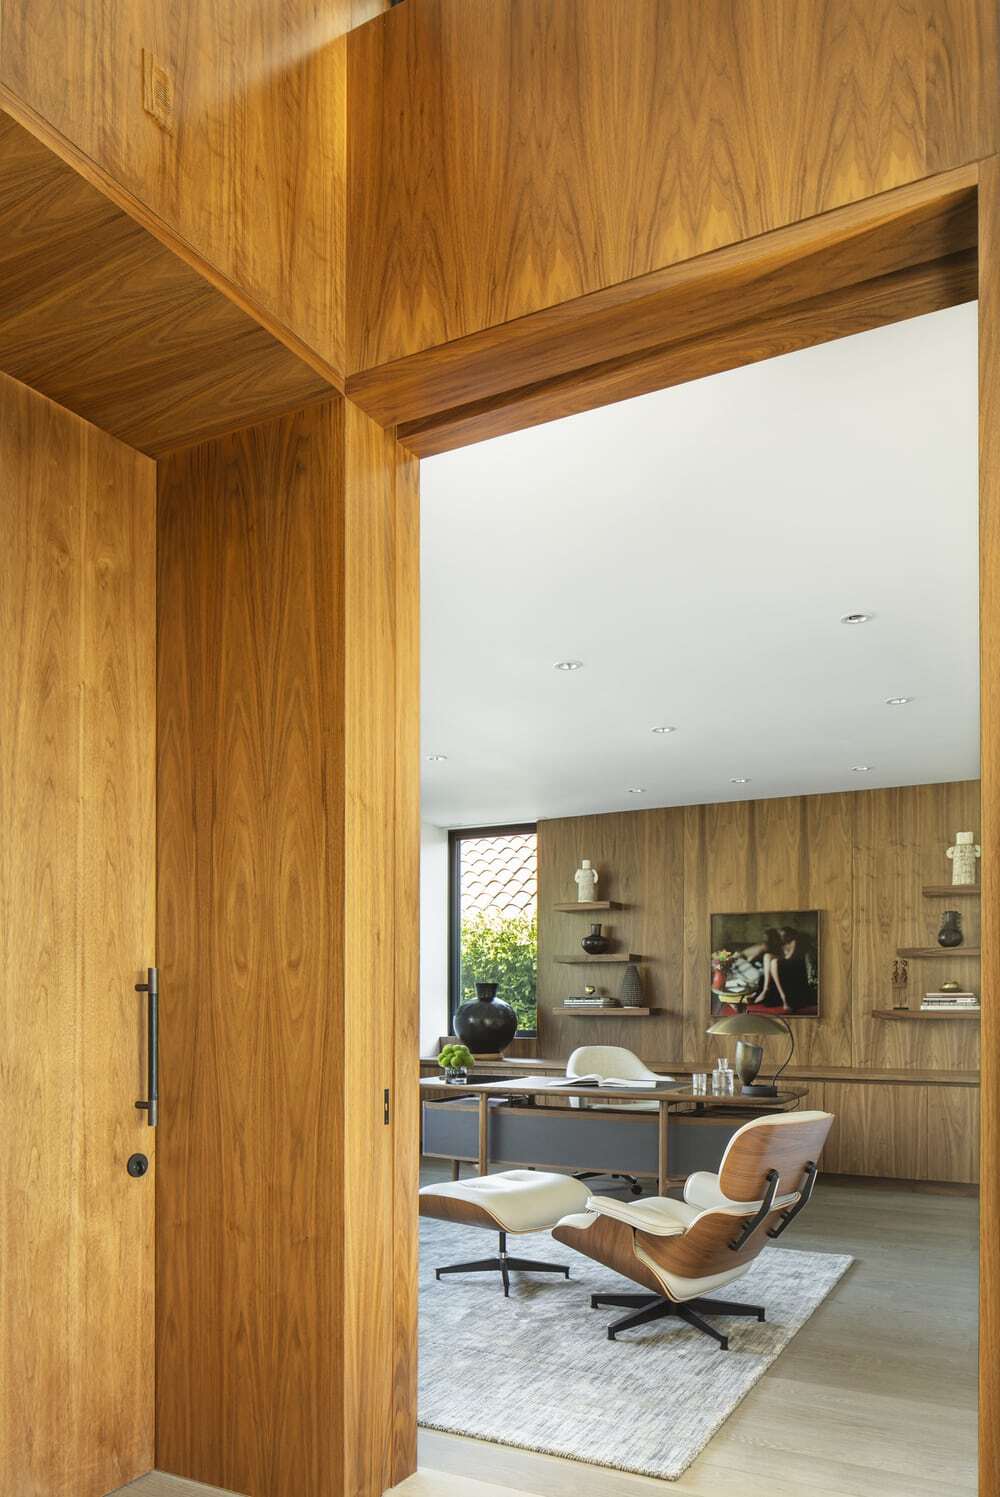 Project: Lush Beverly Hills Bungalow Architects: Abramson Architects Interior Design: Magni Kalman Design Construction: MODAA Construcion Location: Beverly Hills, California, United States Size: 2,500 sq ft Completion date: 2020 Photo Credits: Manolo Langis Text and Photos: Courtesy of Abramson Architects